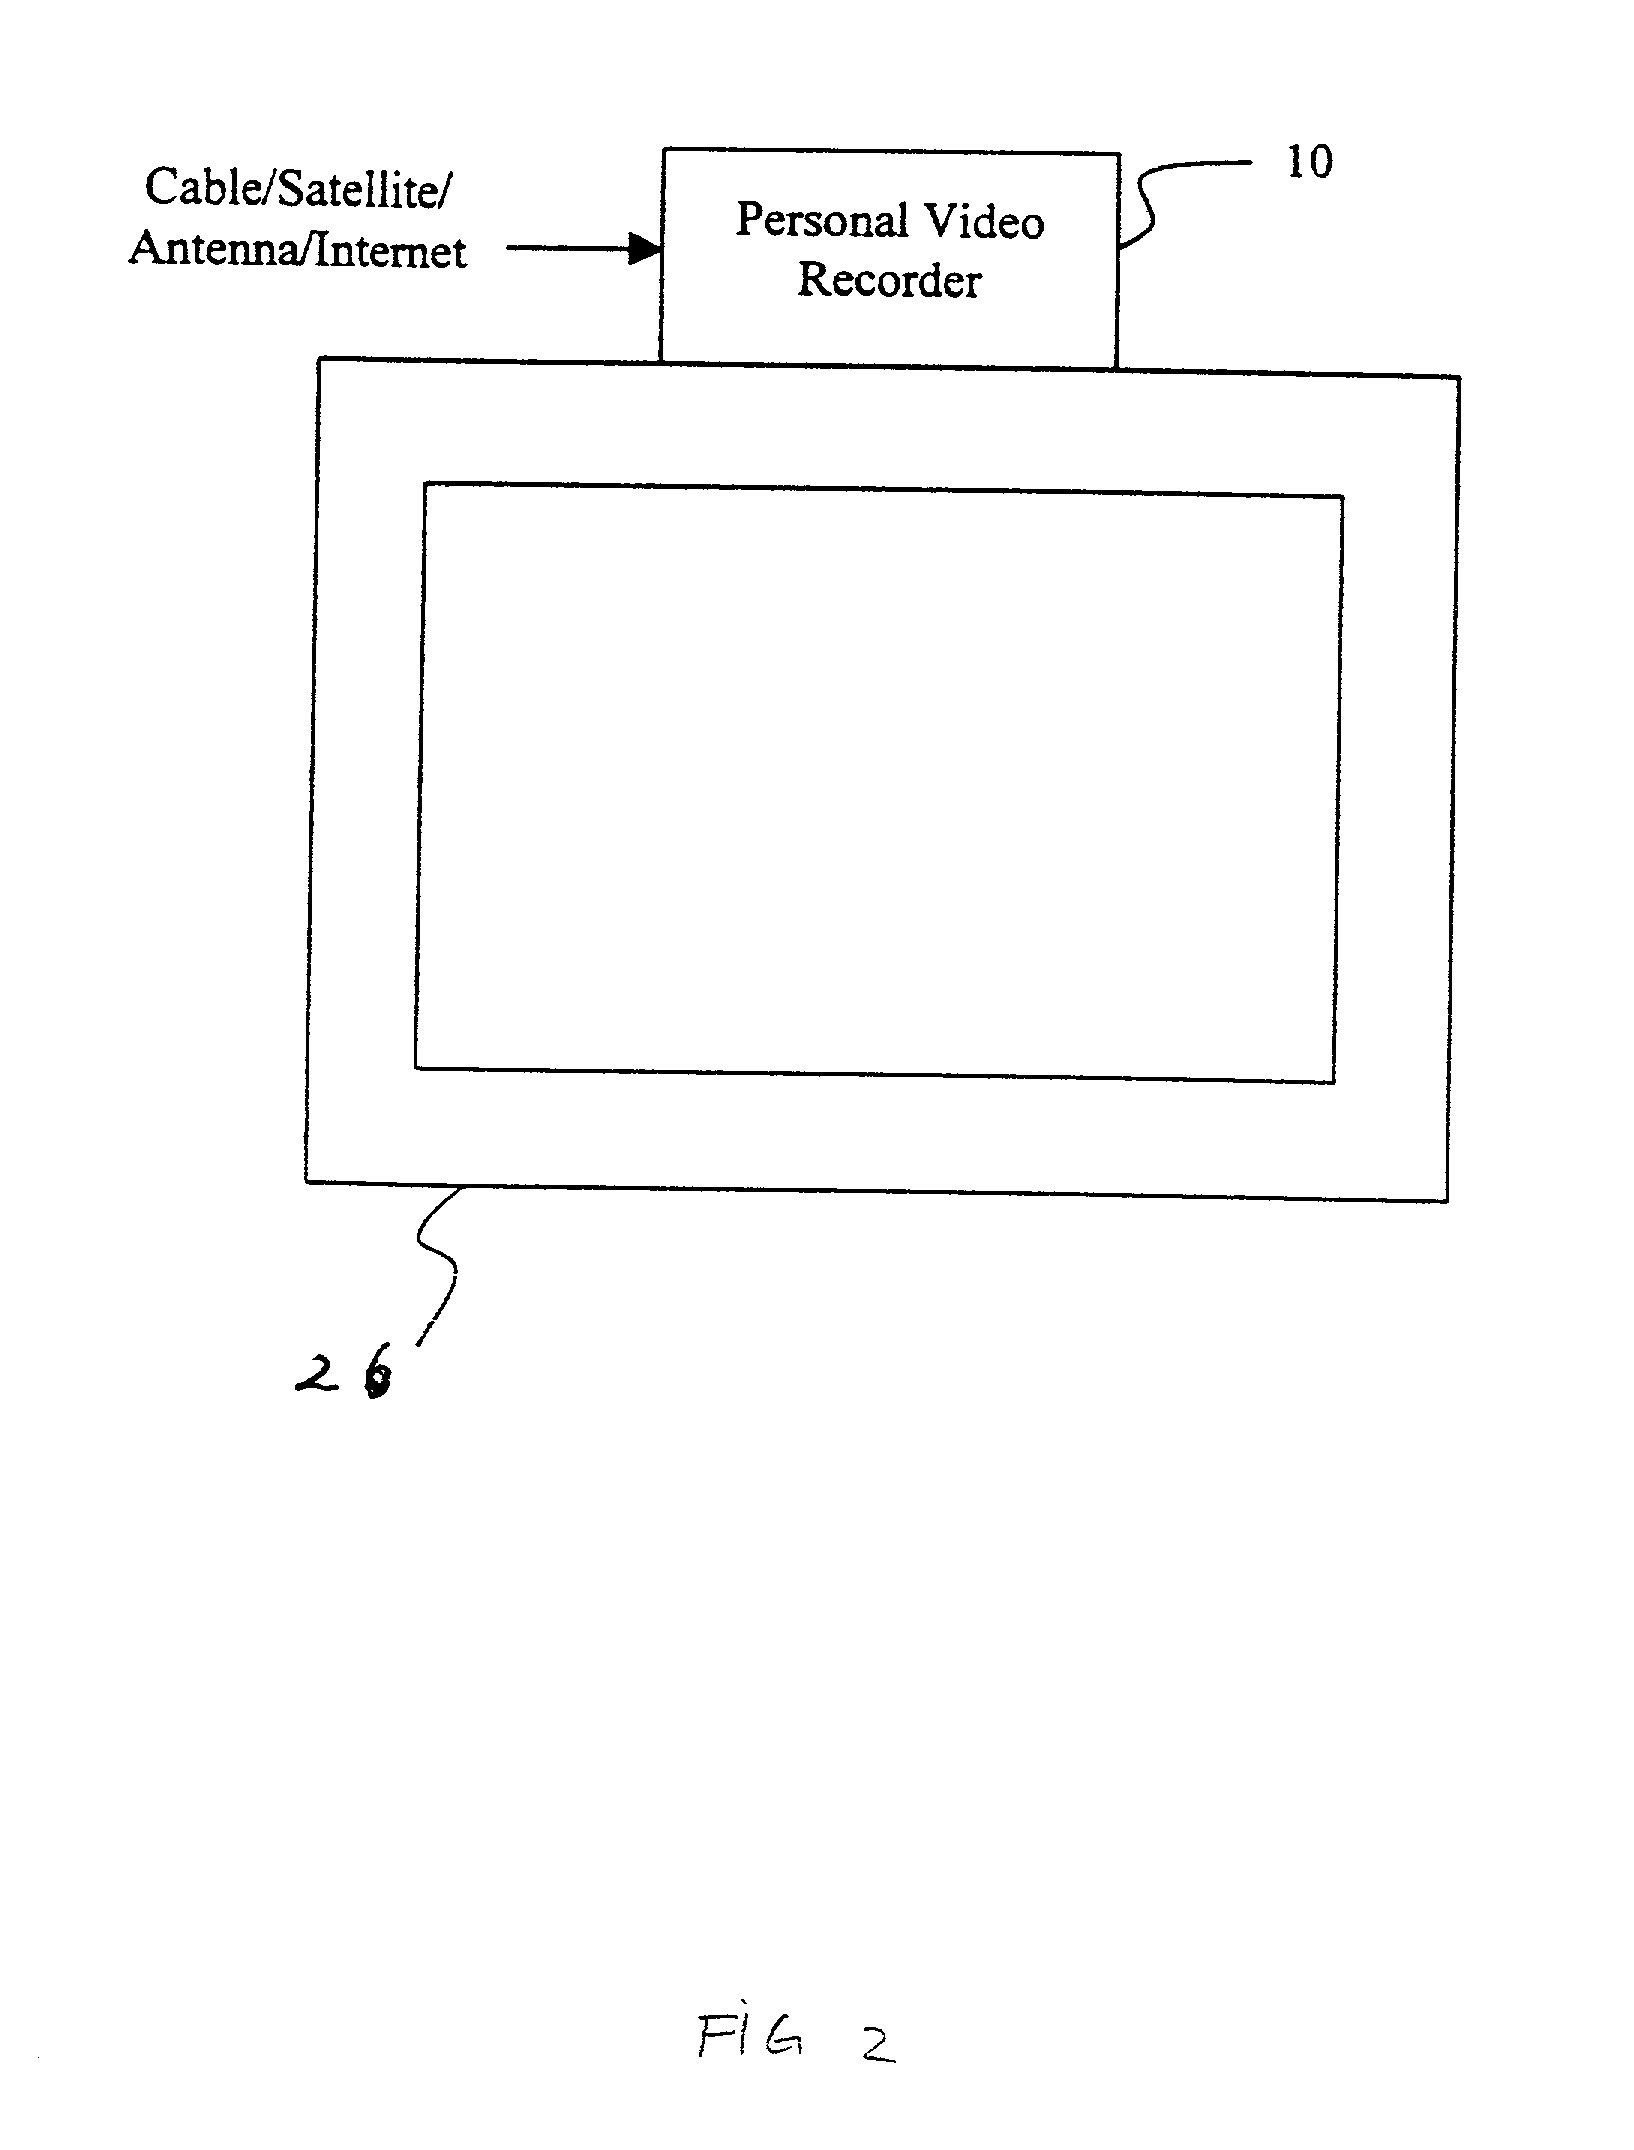 System for synchronizing the playback of two or more connected playback devices using closed captioning